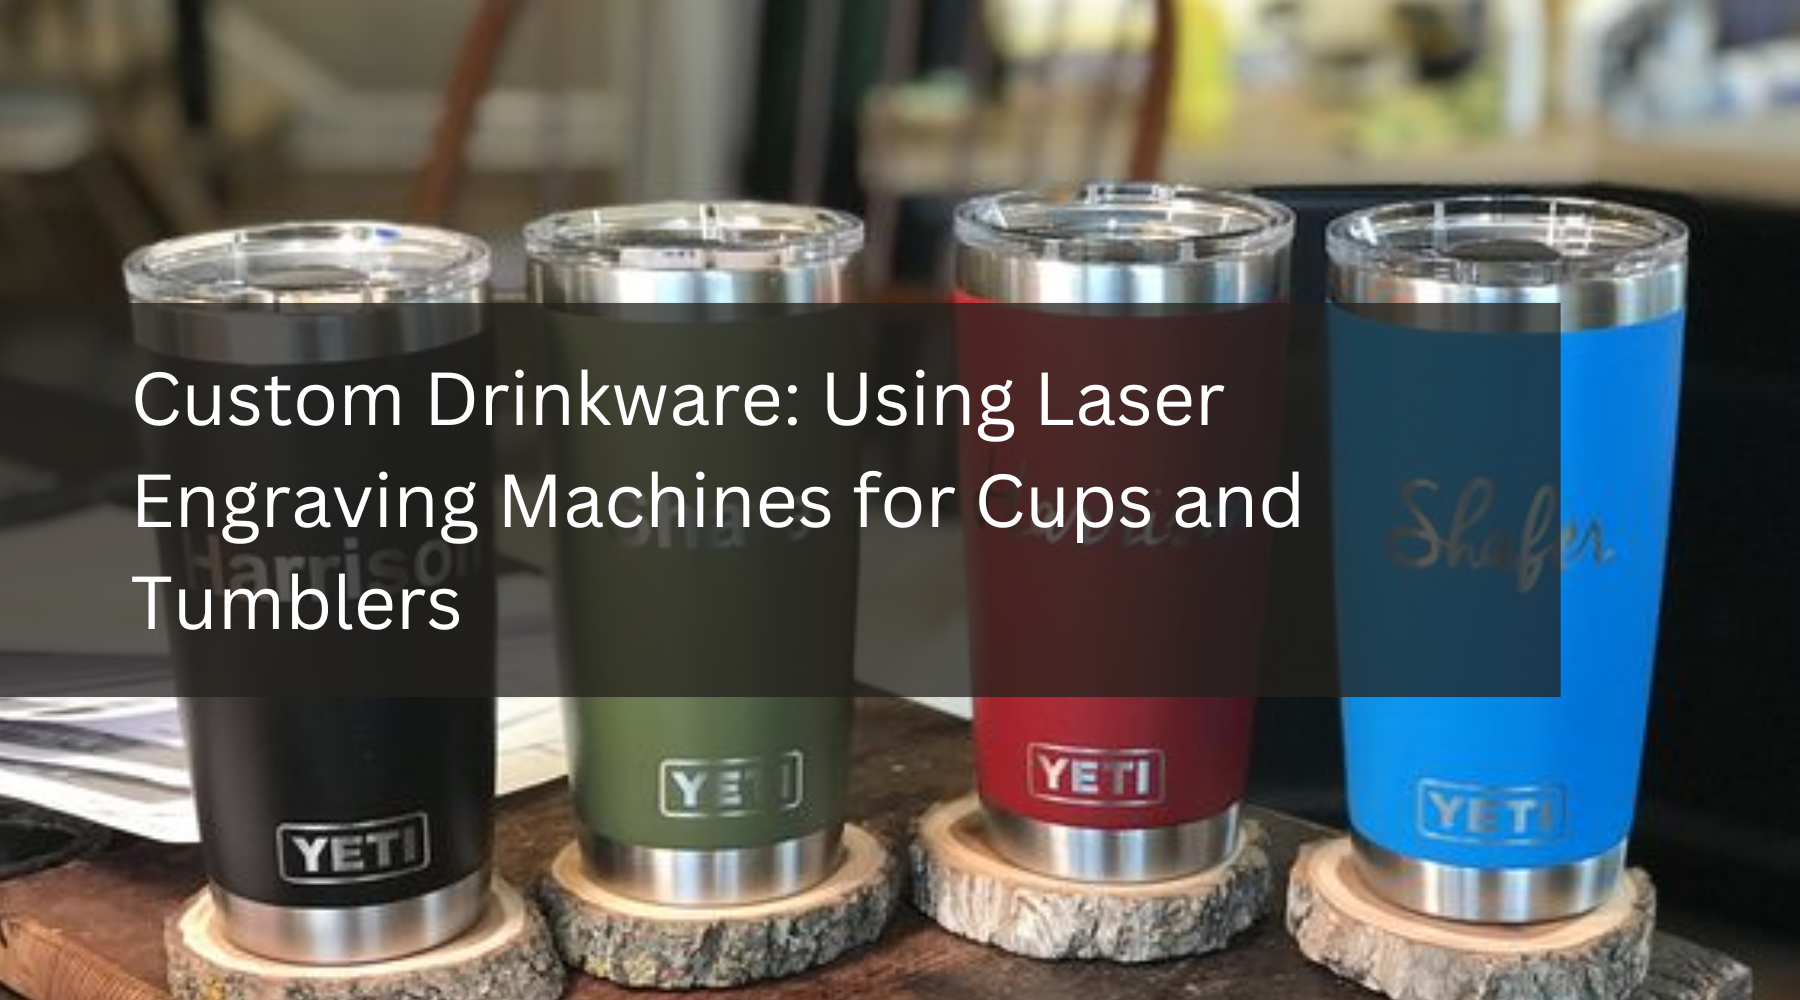 Custom Drinkware: Using Laser Engraving Machines for Cups and Tumblers